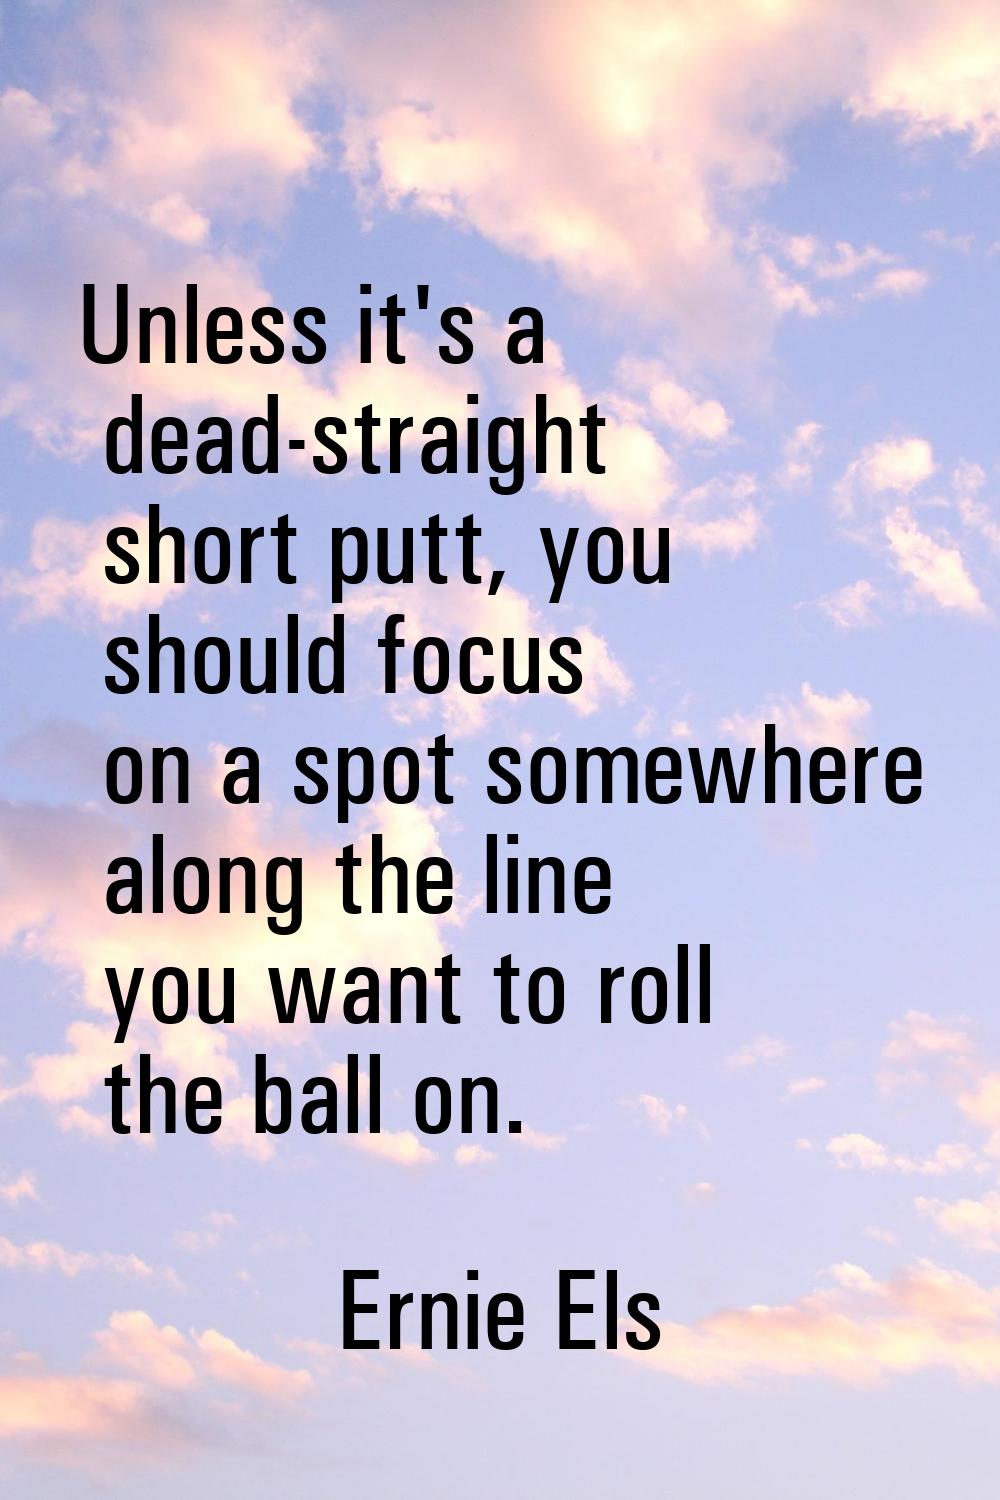 Unless it's a dead-straight short putt, you should focus on a spot somewhere along the line you wan